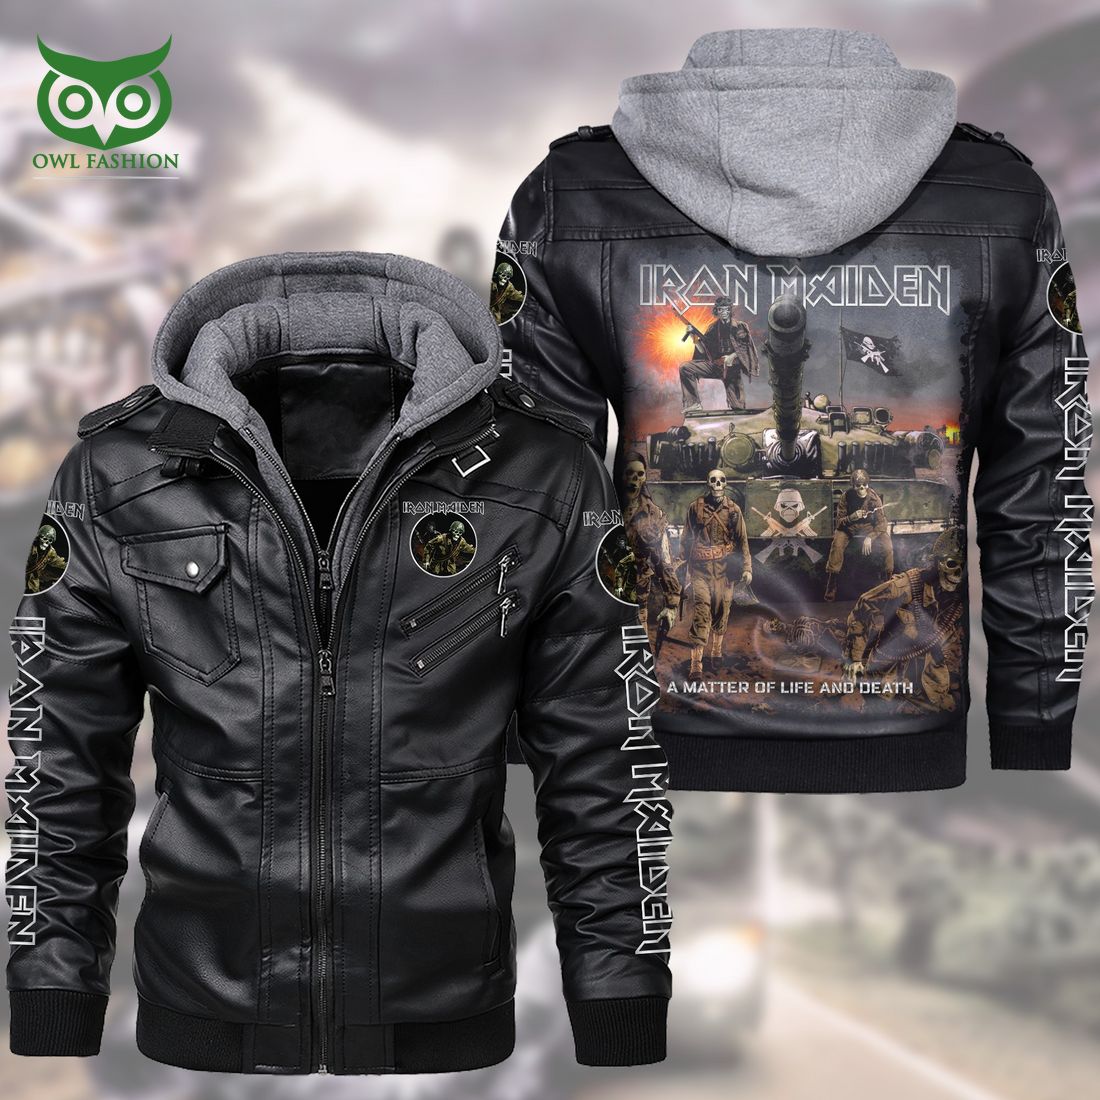 Ironmaiden A Matter Of Life And Death 2D Leather Jacket Great, I liked it